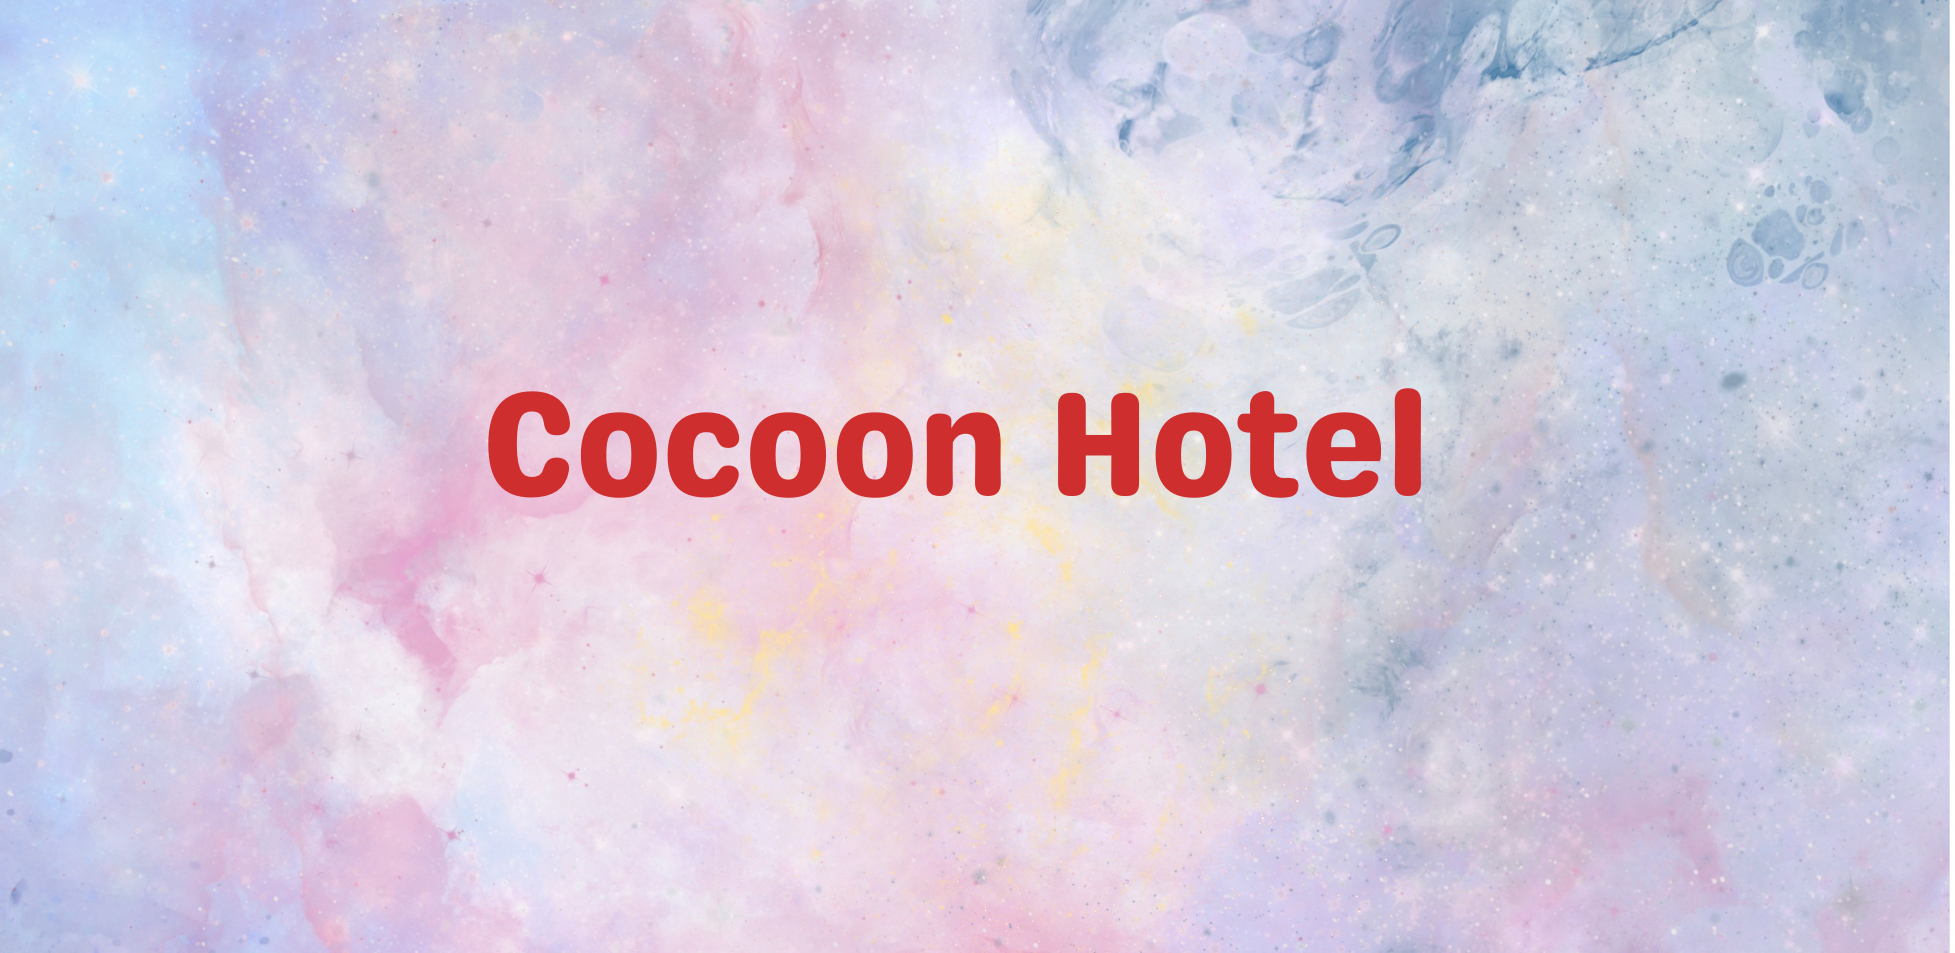  Cocoon Hotel